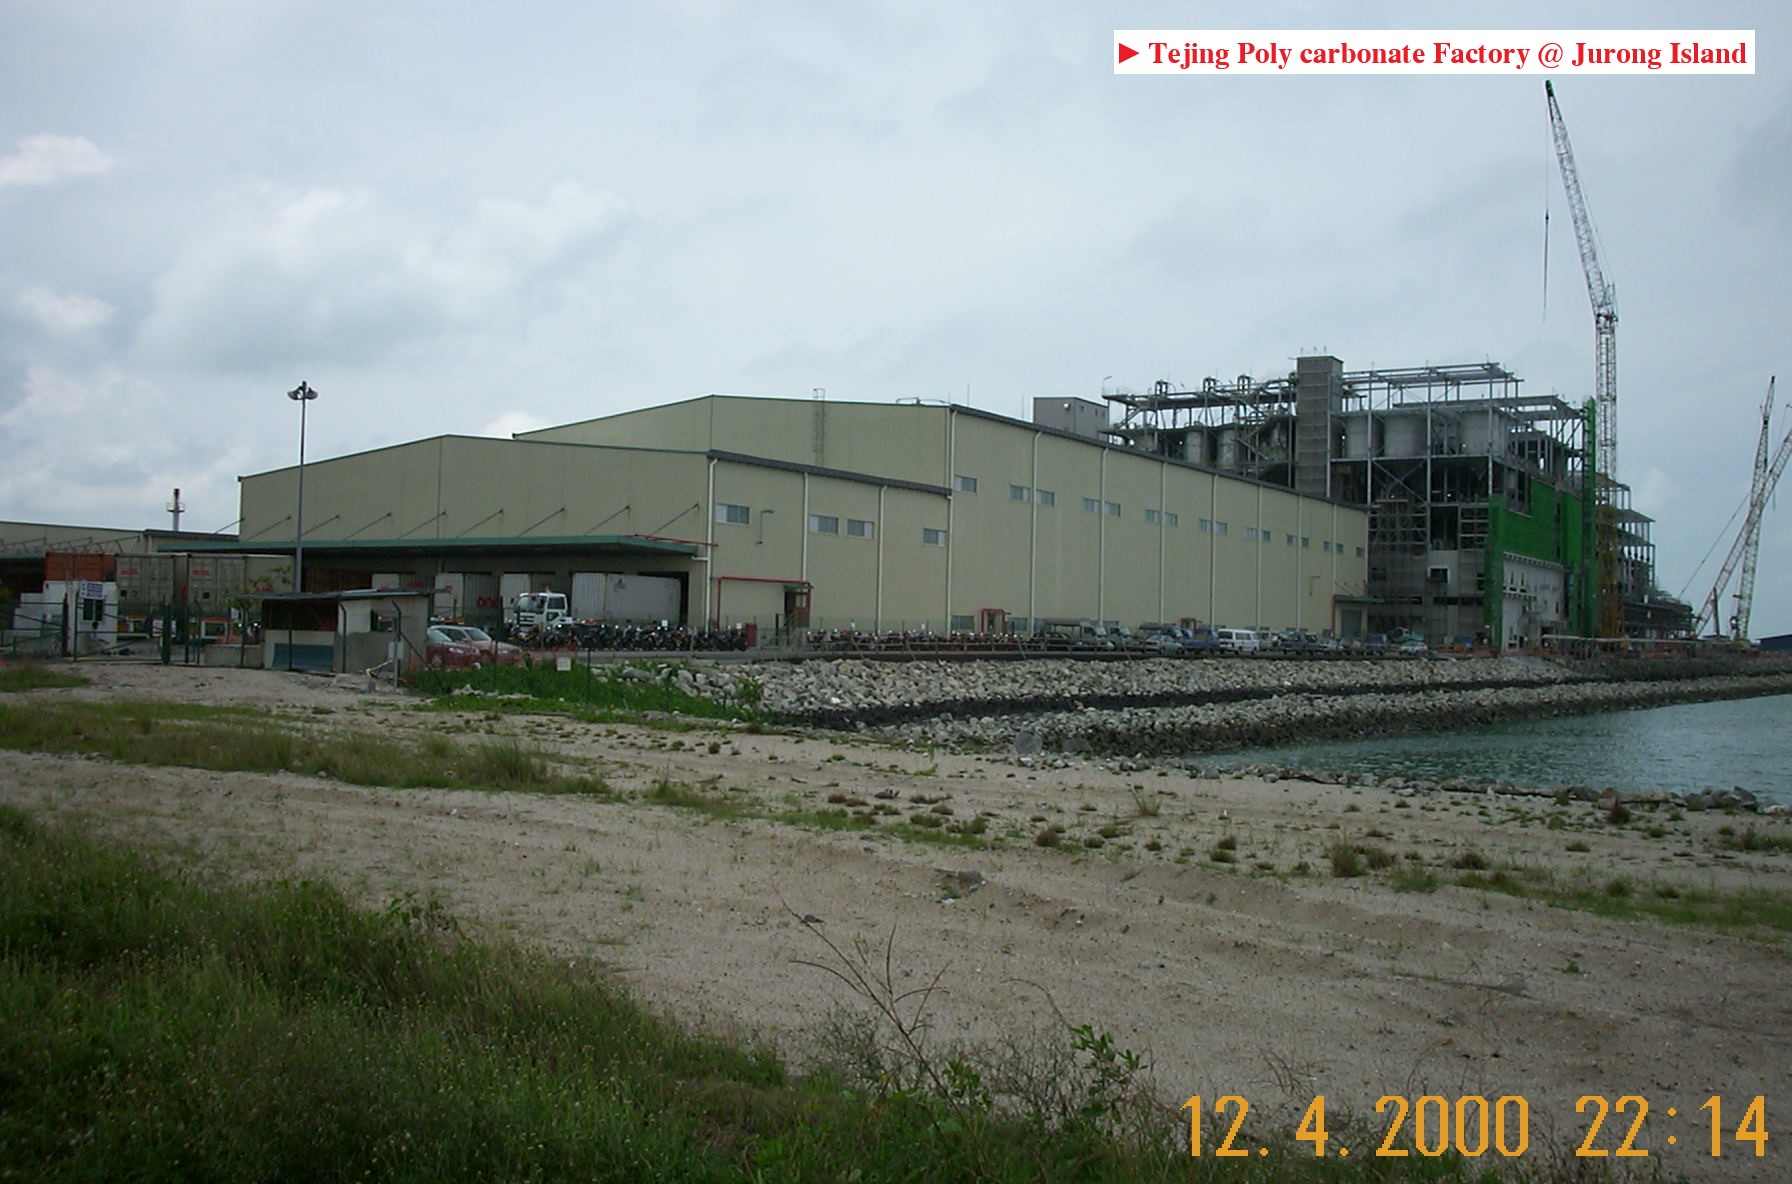 Tejing Poly carbonate Factory @ Jurong Island